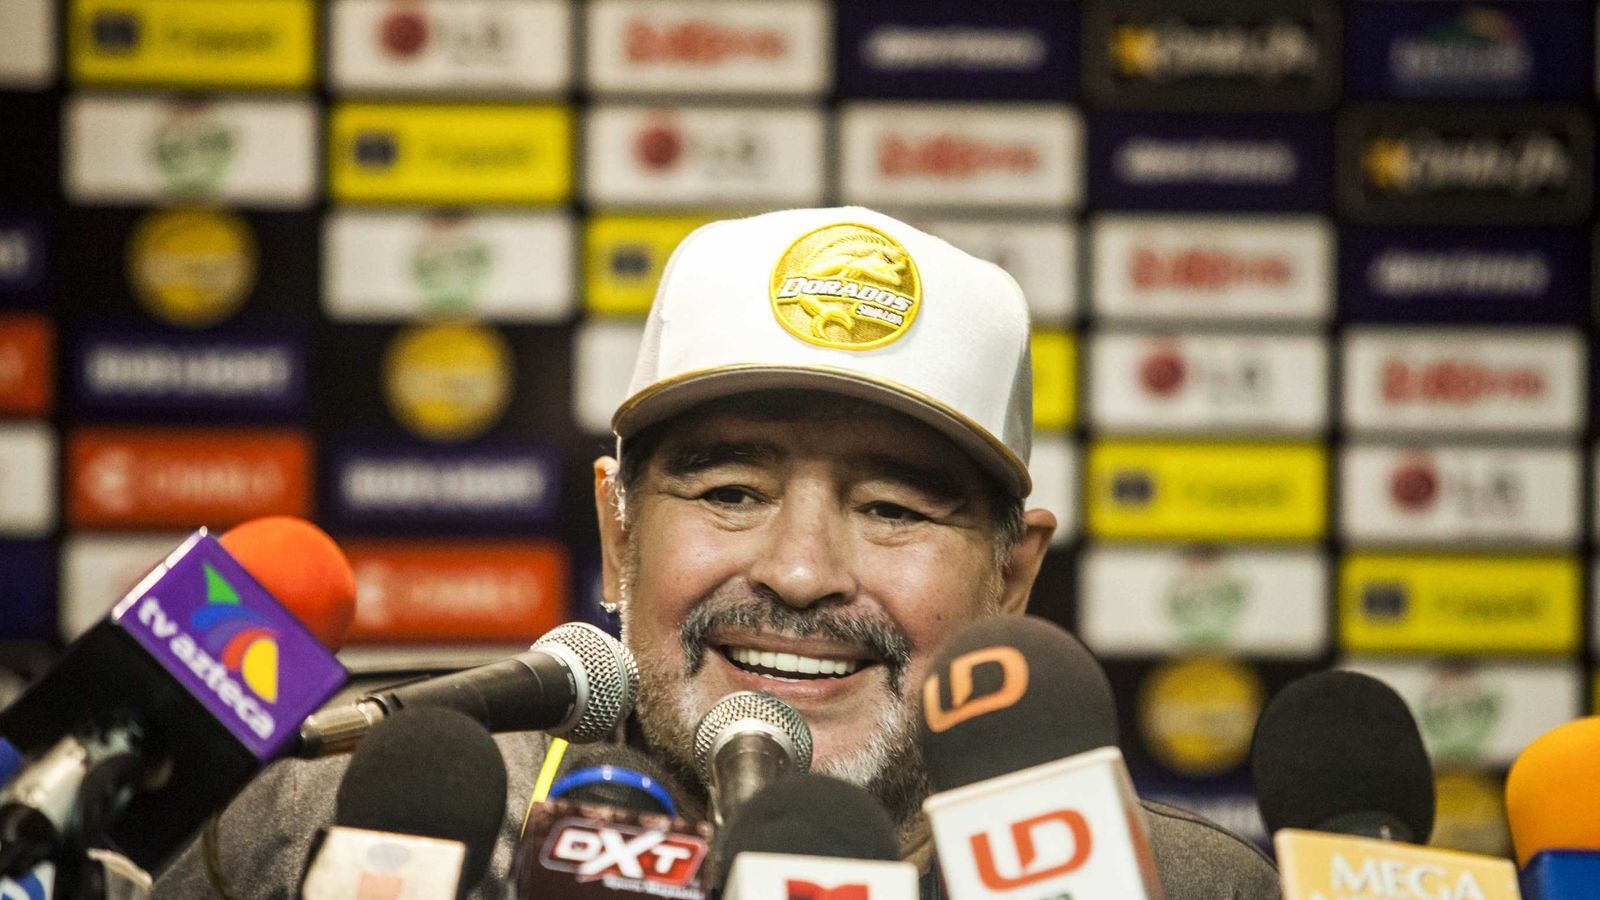 Torres Confirms That Maradona Will Be the Coach for Spain if He Is Elected